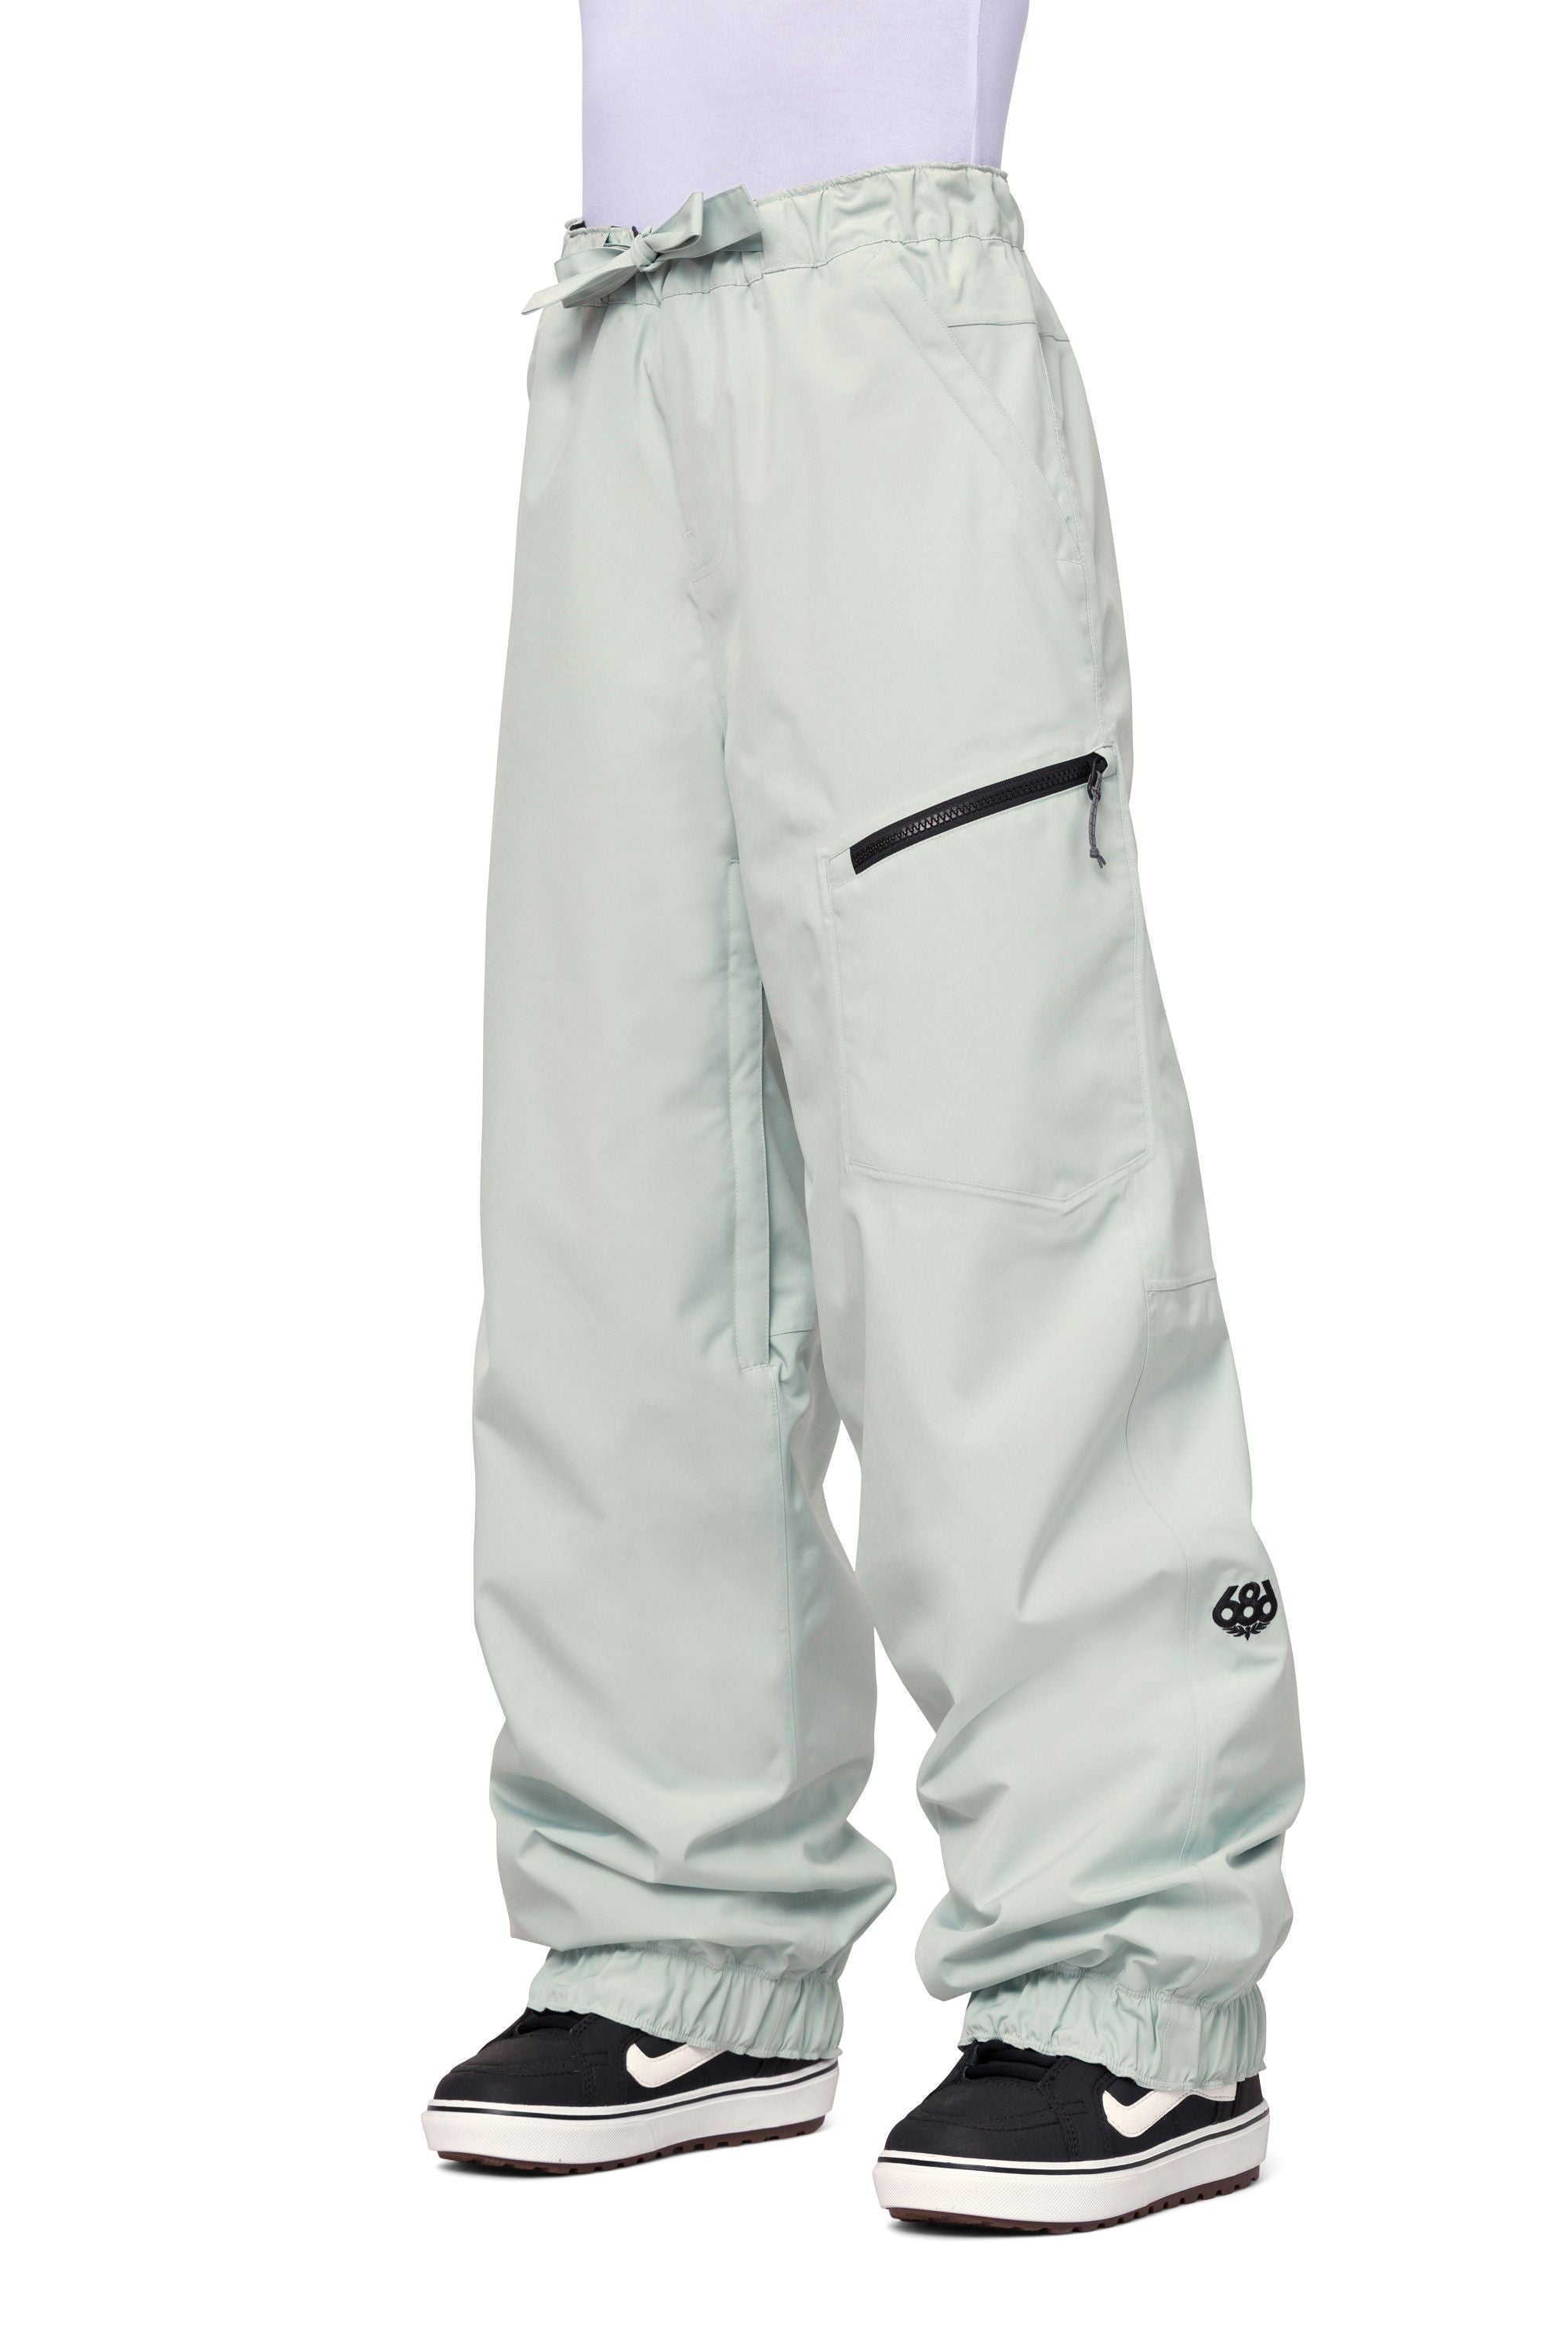 Holden Pockets Snow Pants for Women